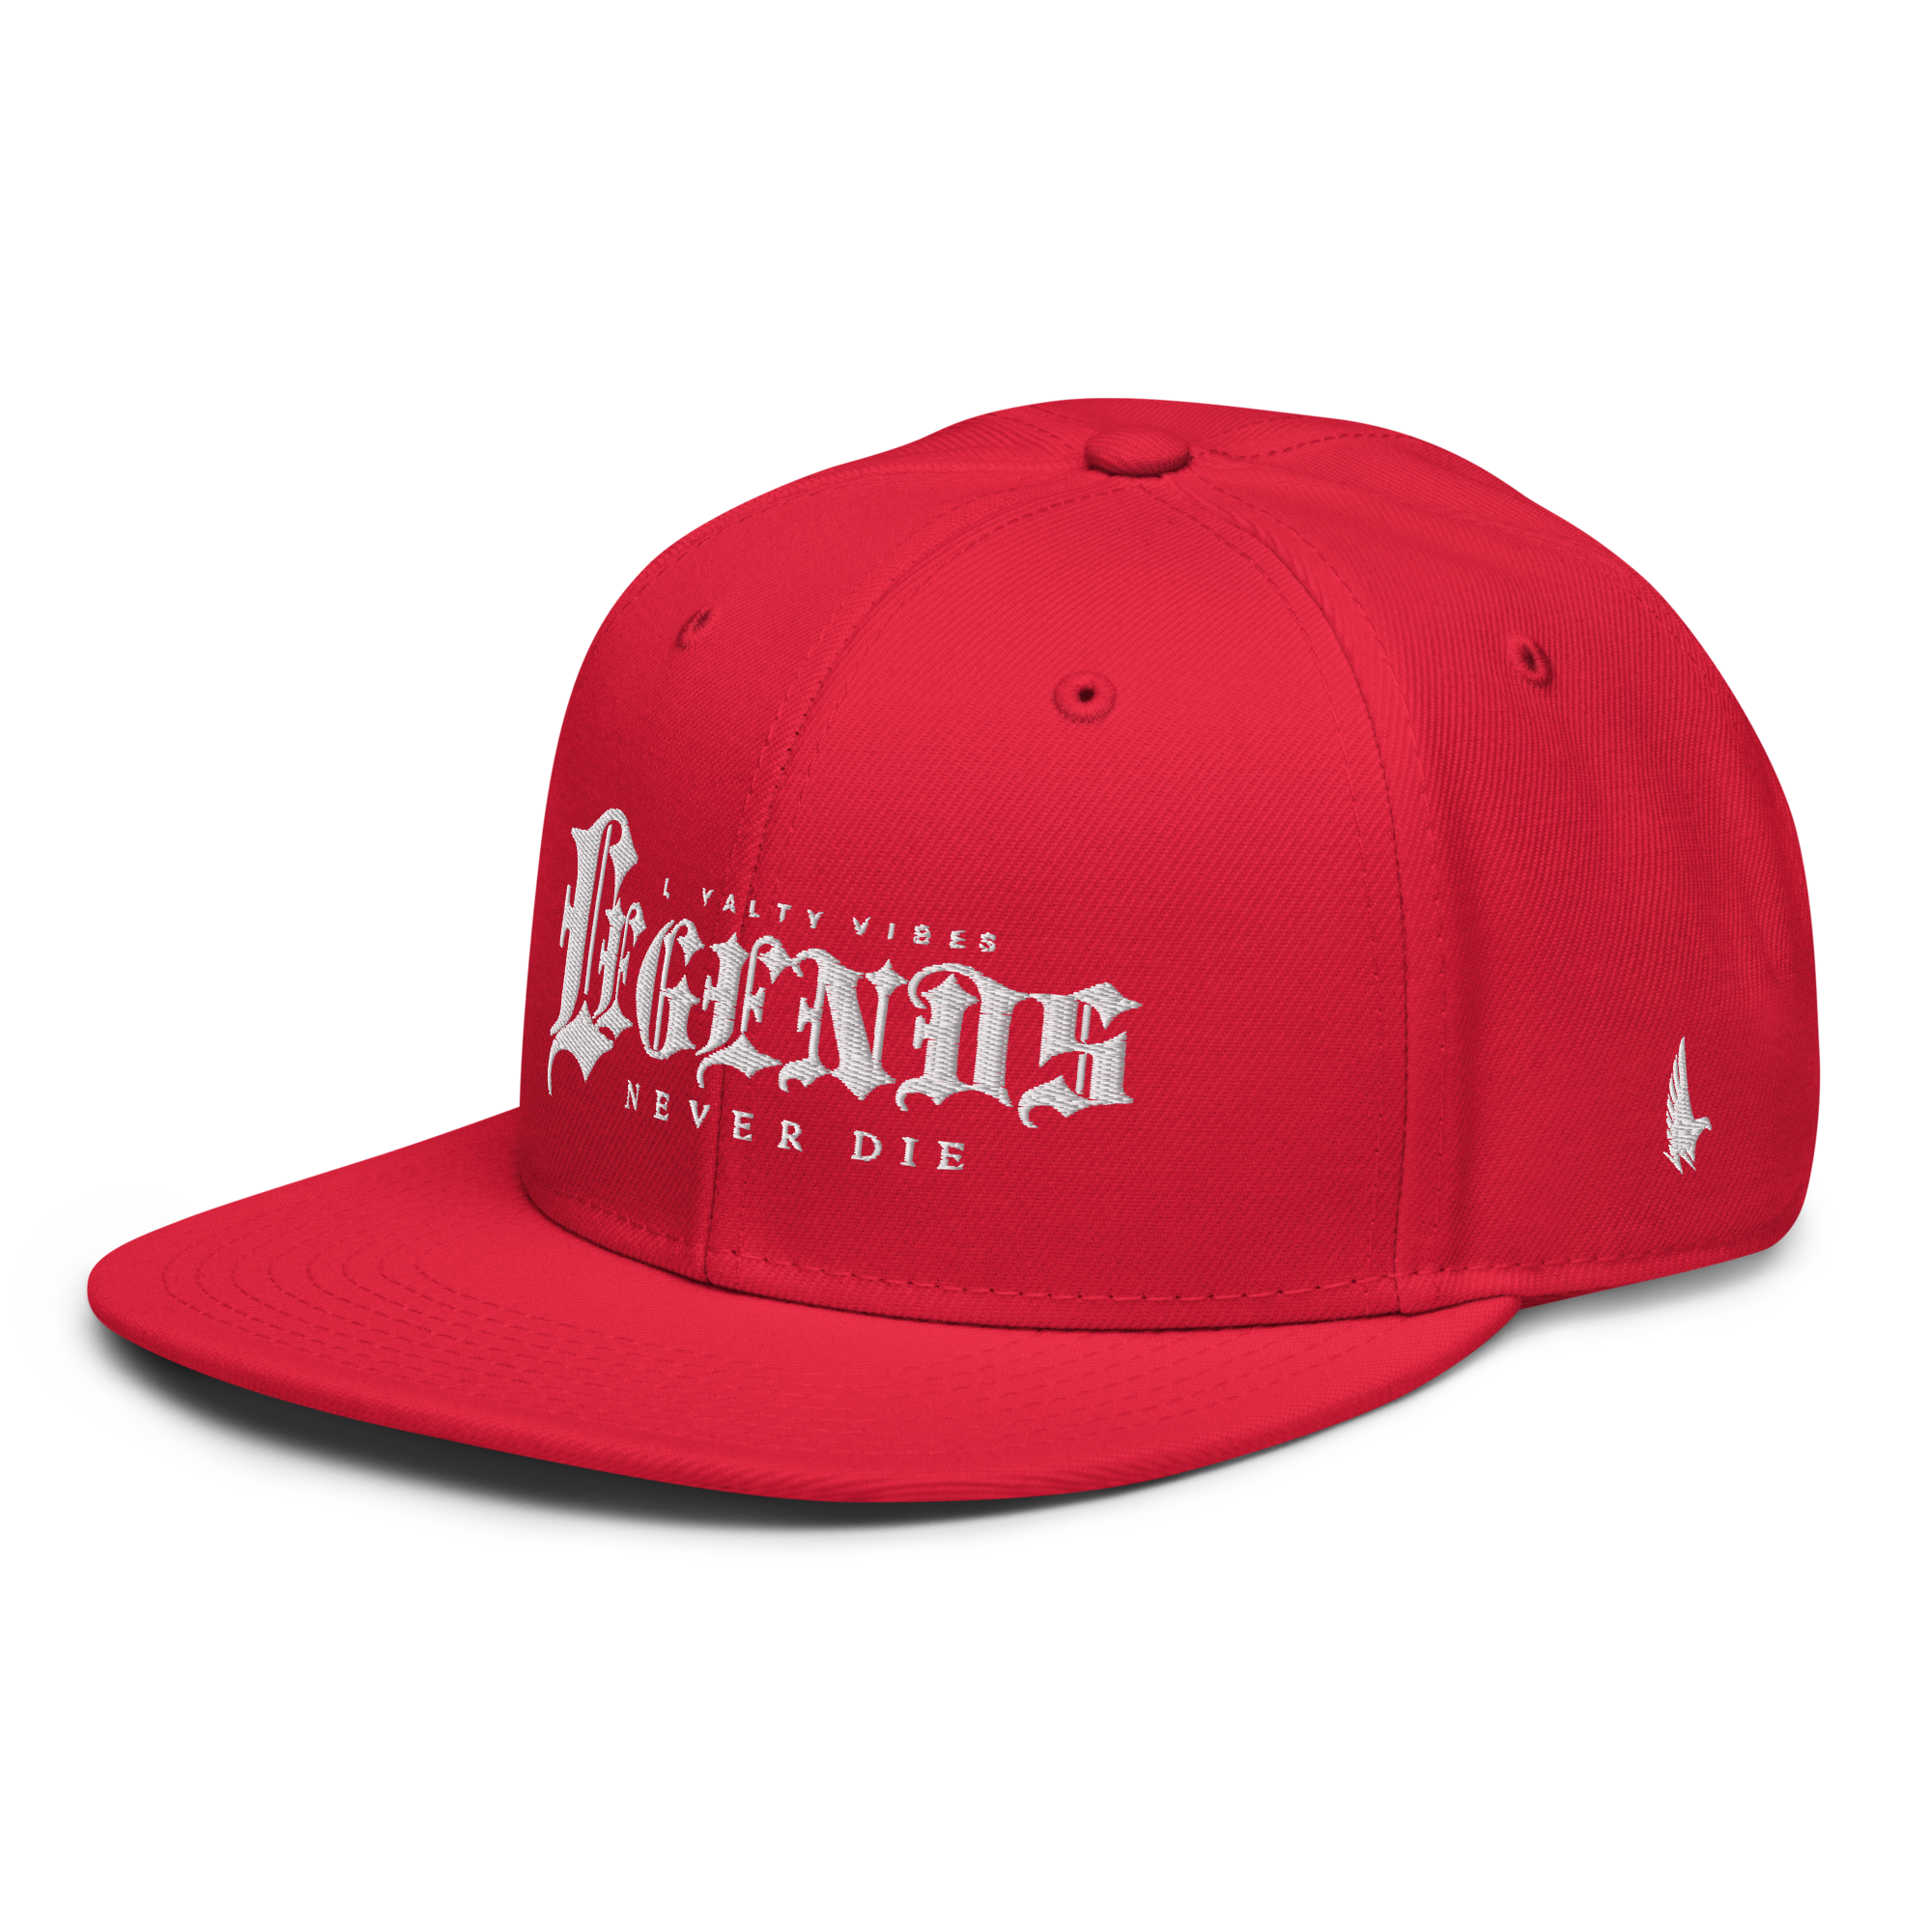 Legends Never Die Snapback Hat Red White OS - Loyalty Vibes